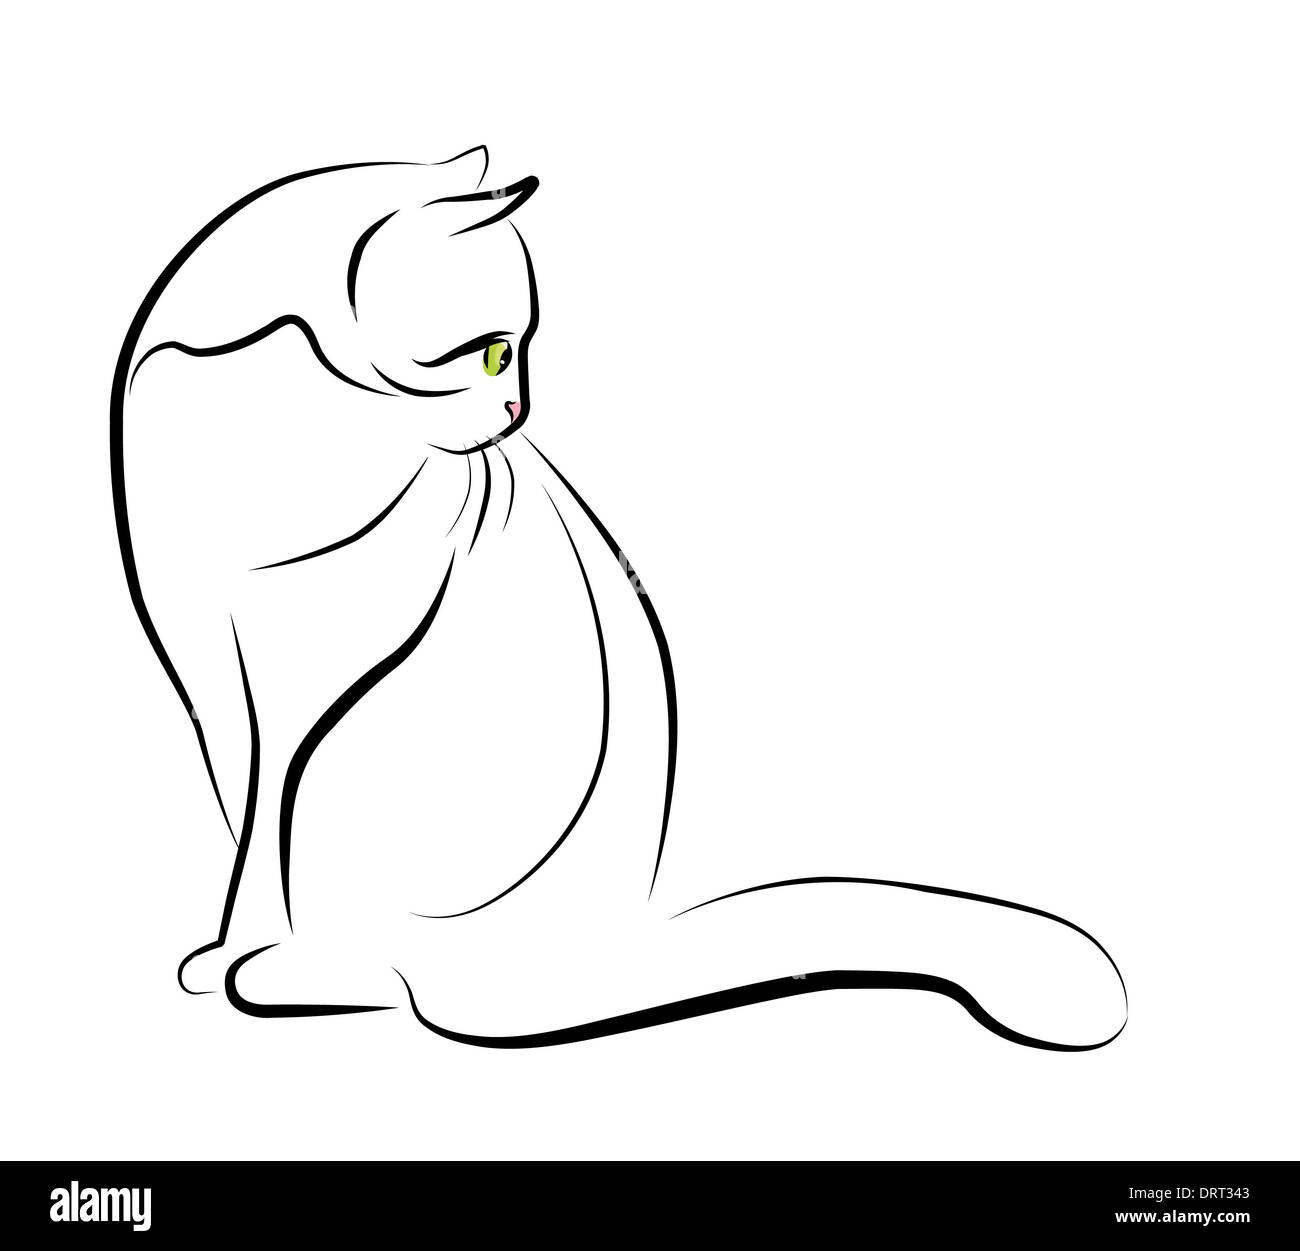 Siamese Cat Sitting For Drawing Pages On A White Background Outline Sketch  Vector Realistic Cat Drawing Realistic Cat Outline Realistic Cat Sketch  PNG and Vector with Transparent Background for Free Download